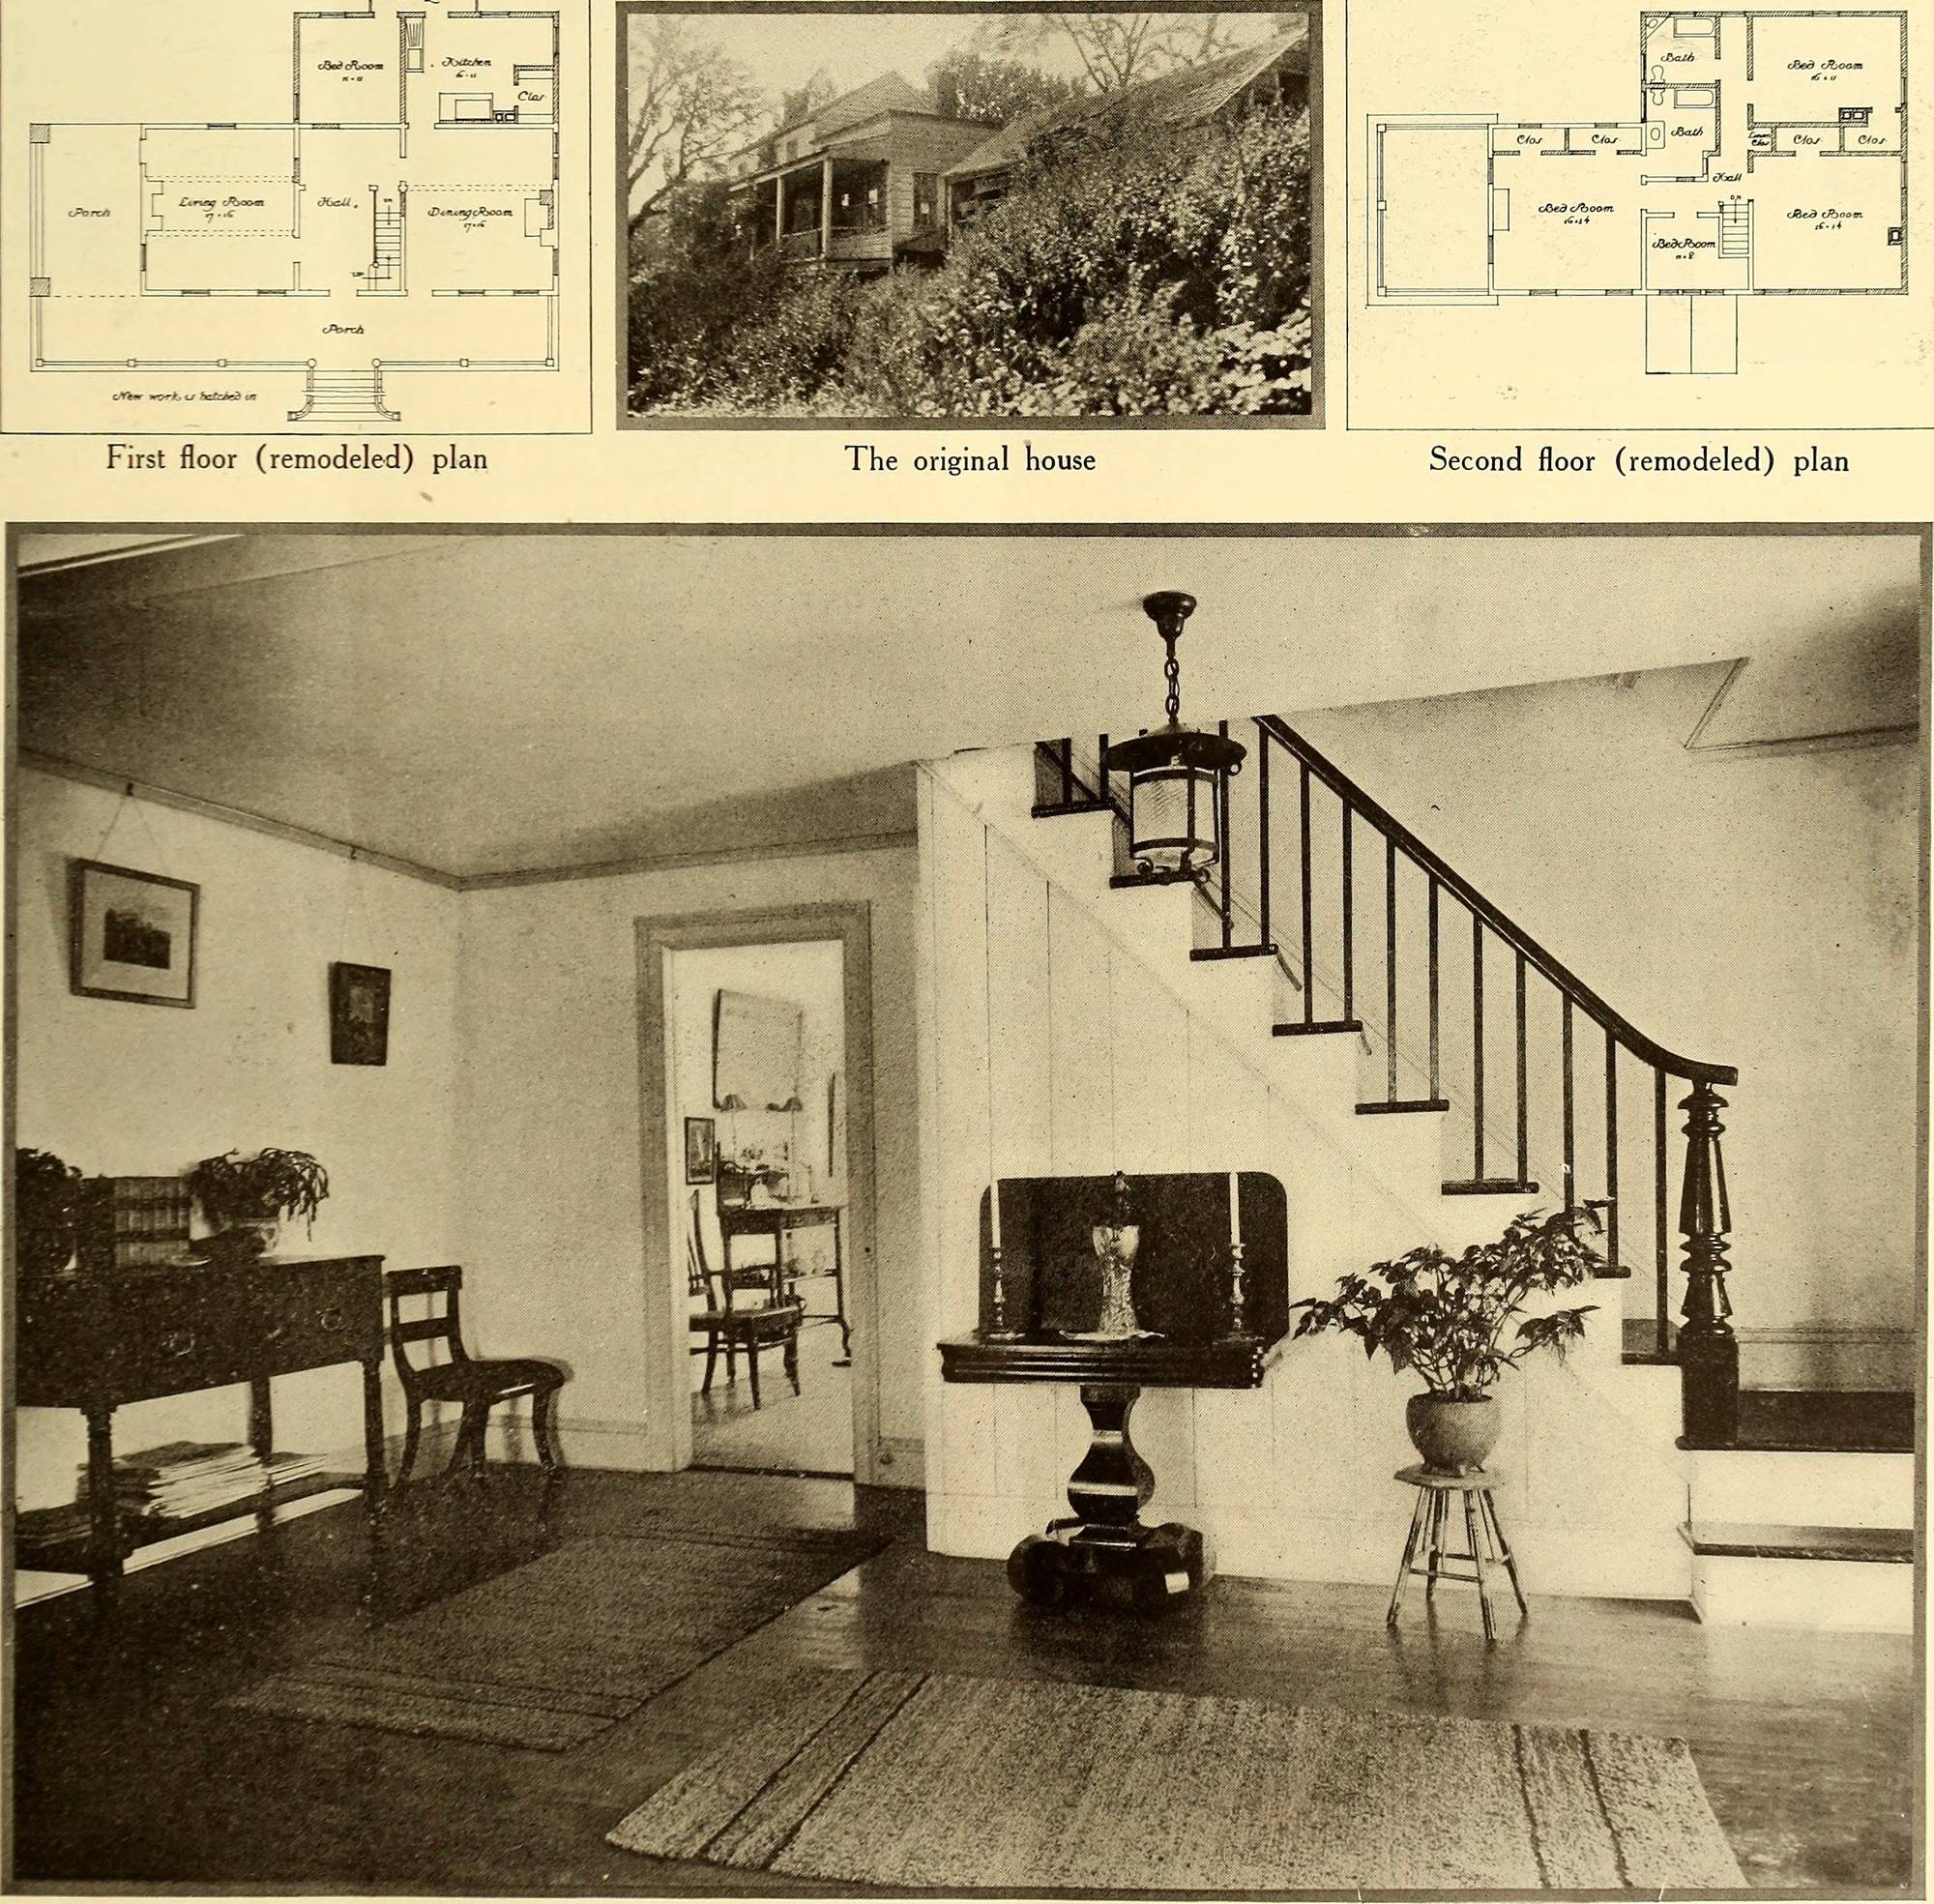 Floor plan of a house and the interior and exterior image of the house